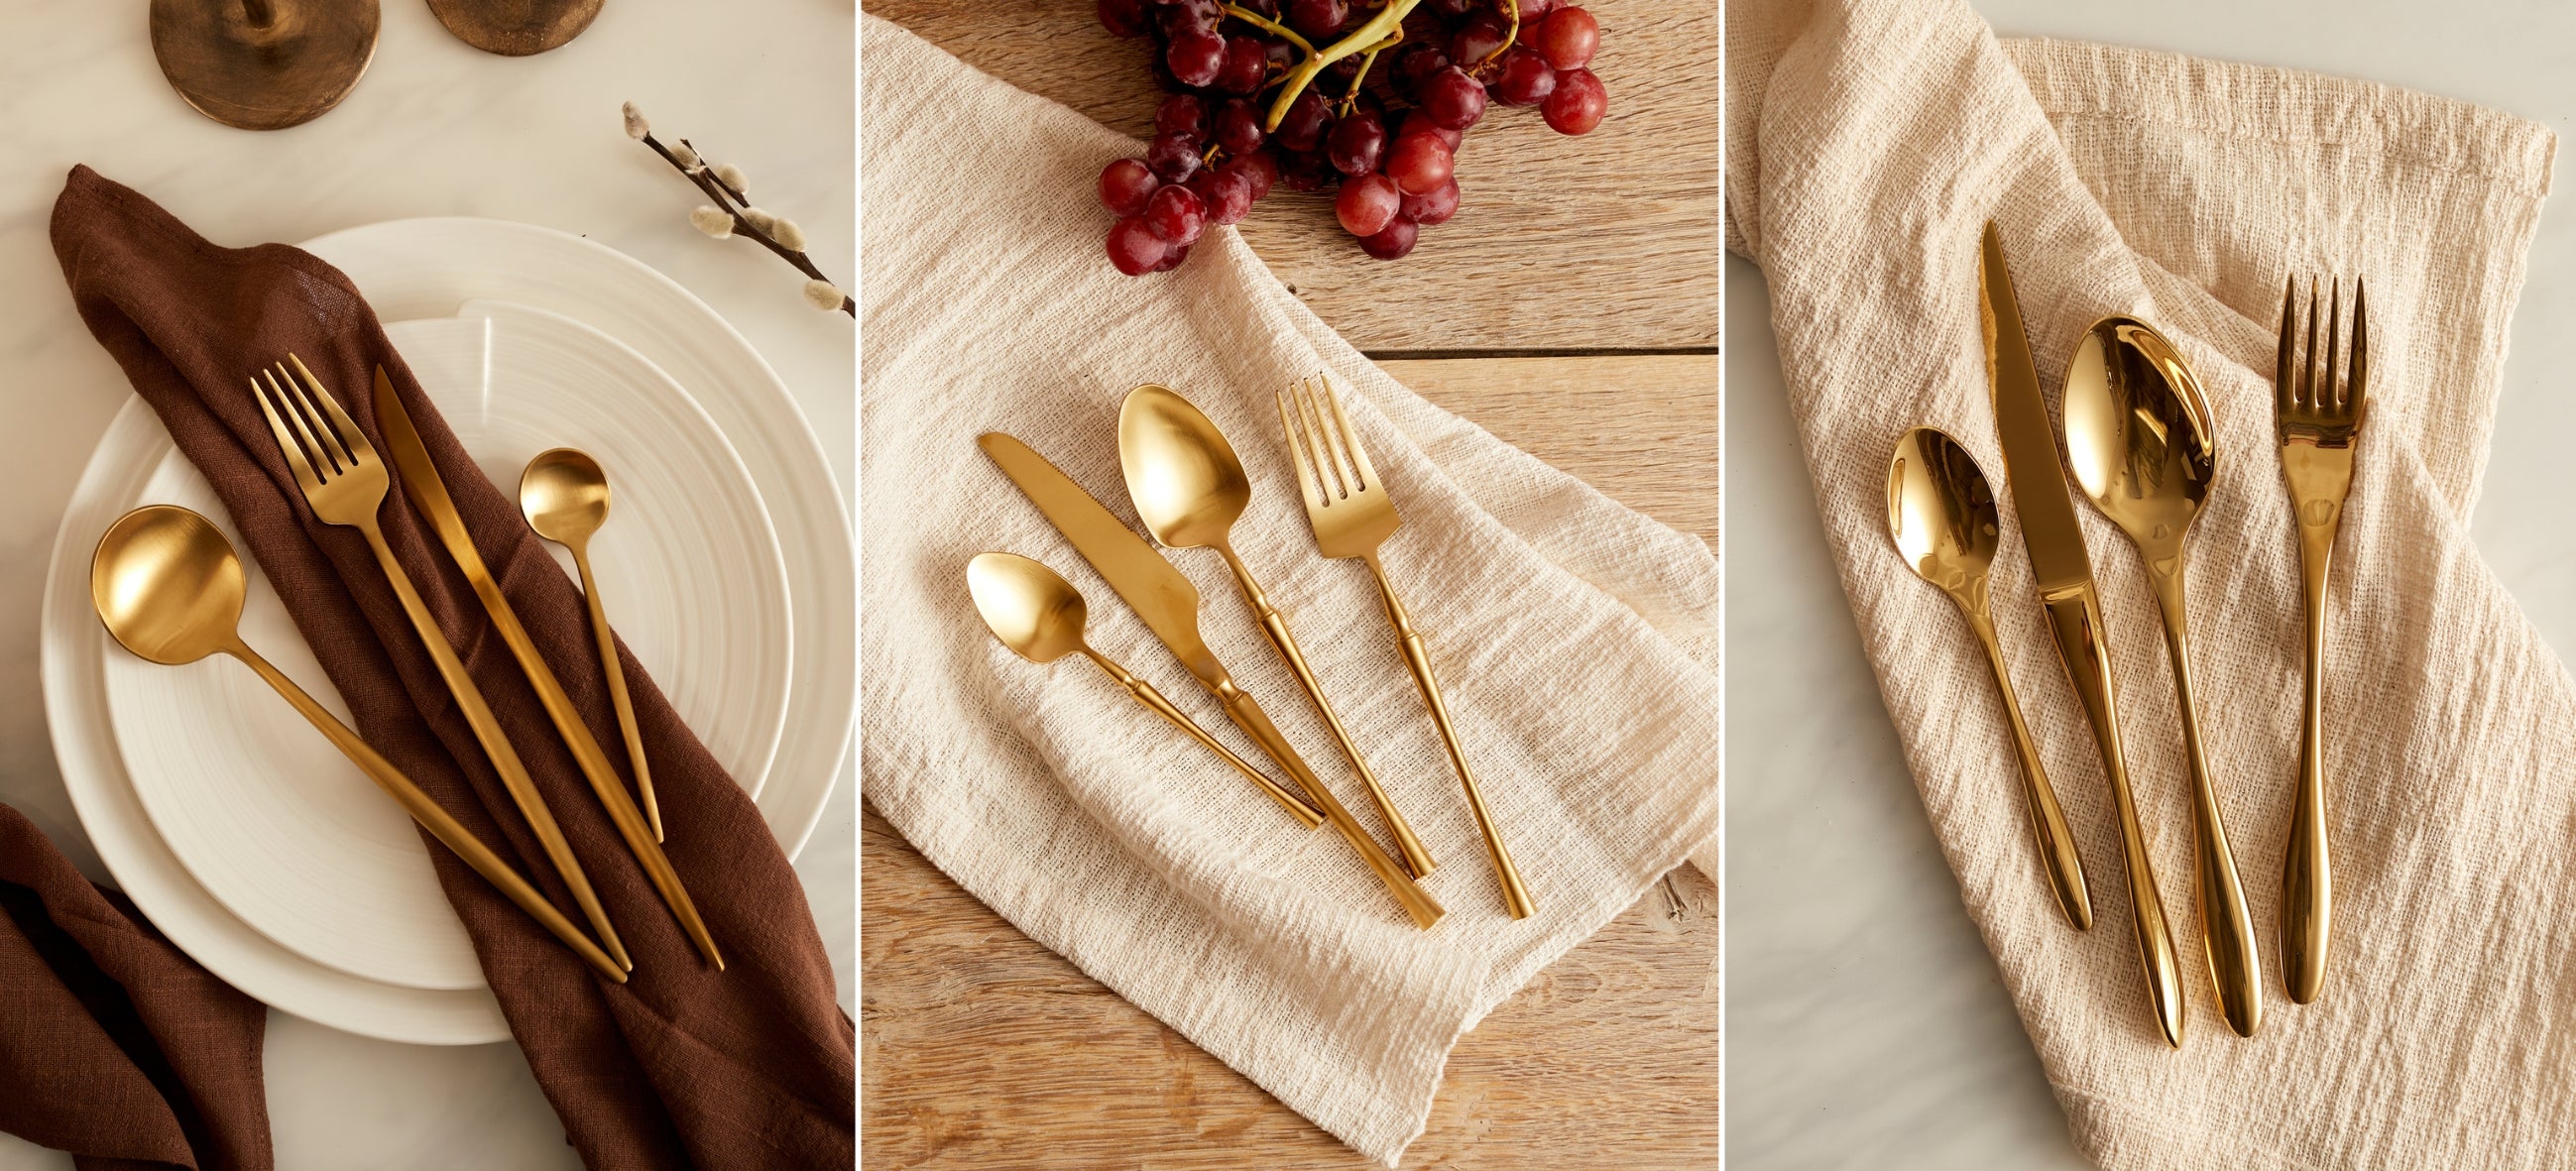 What a Host Home: Gold Cutlery Sets